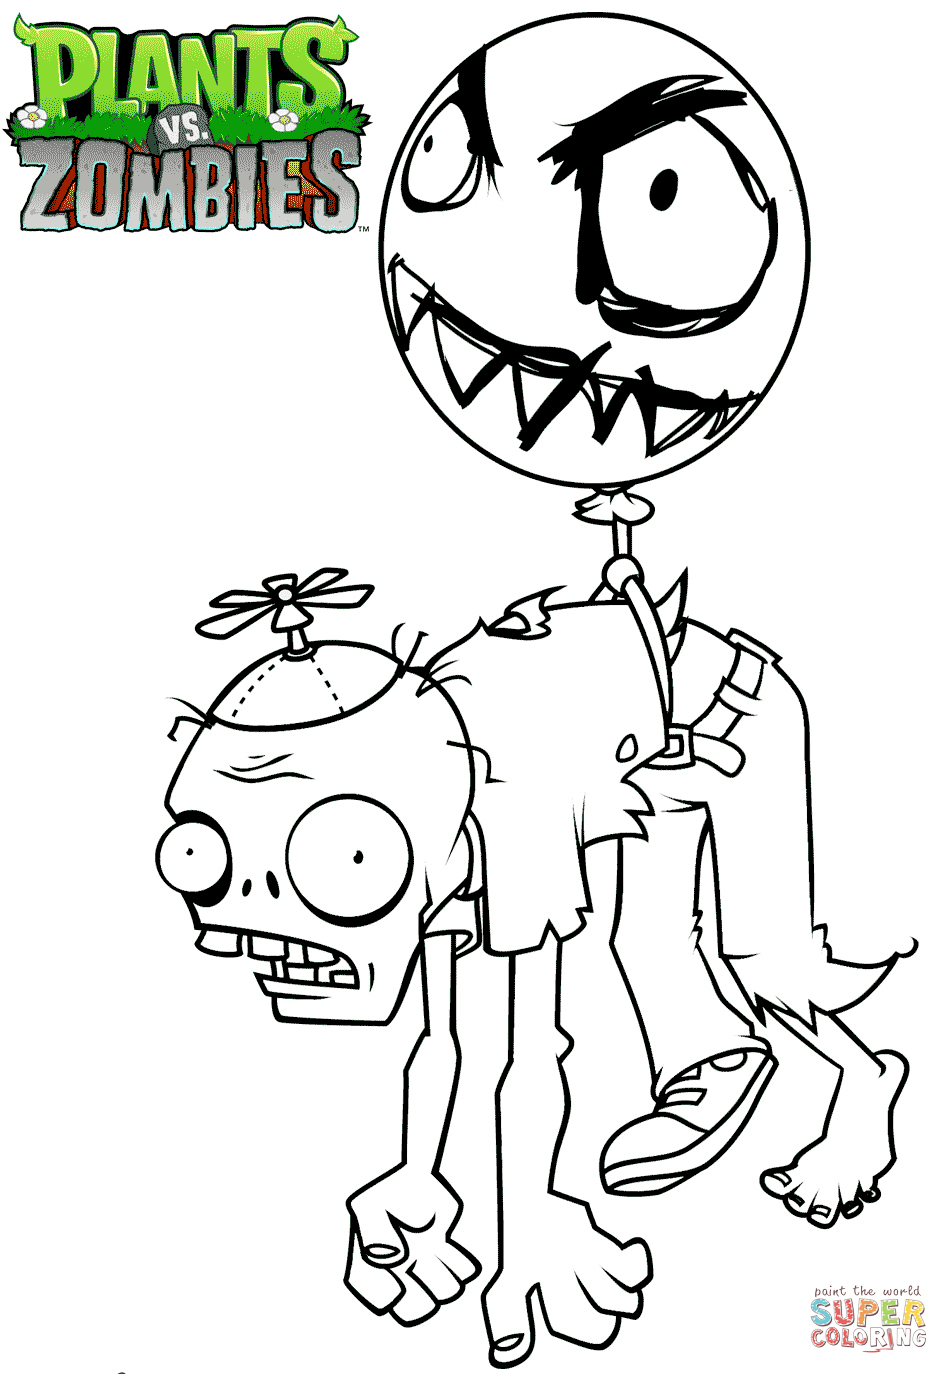 Free Plants Vs Zombies Zombie Coloring Pages, Download Free Plants Vs